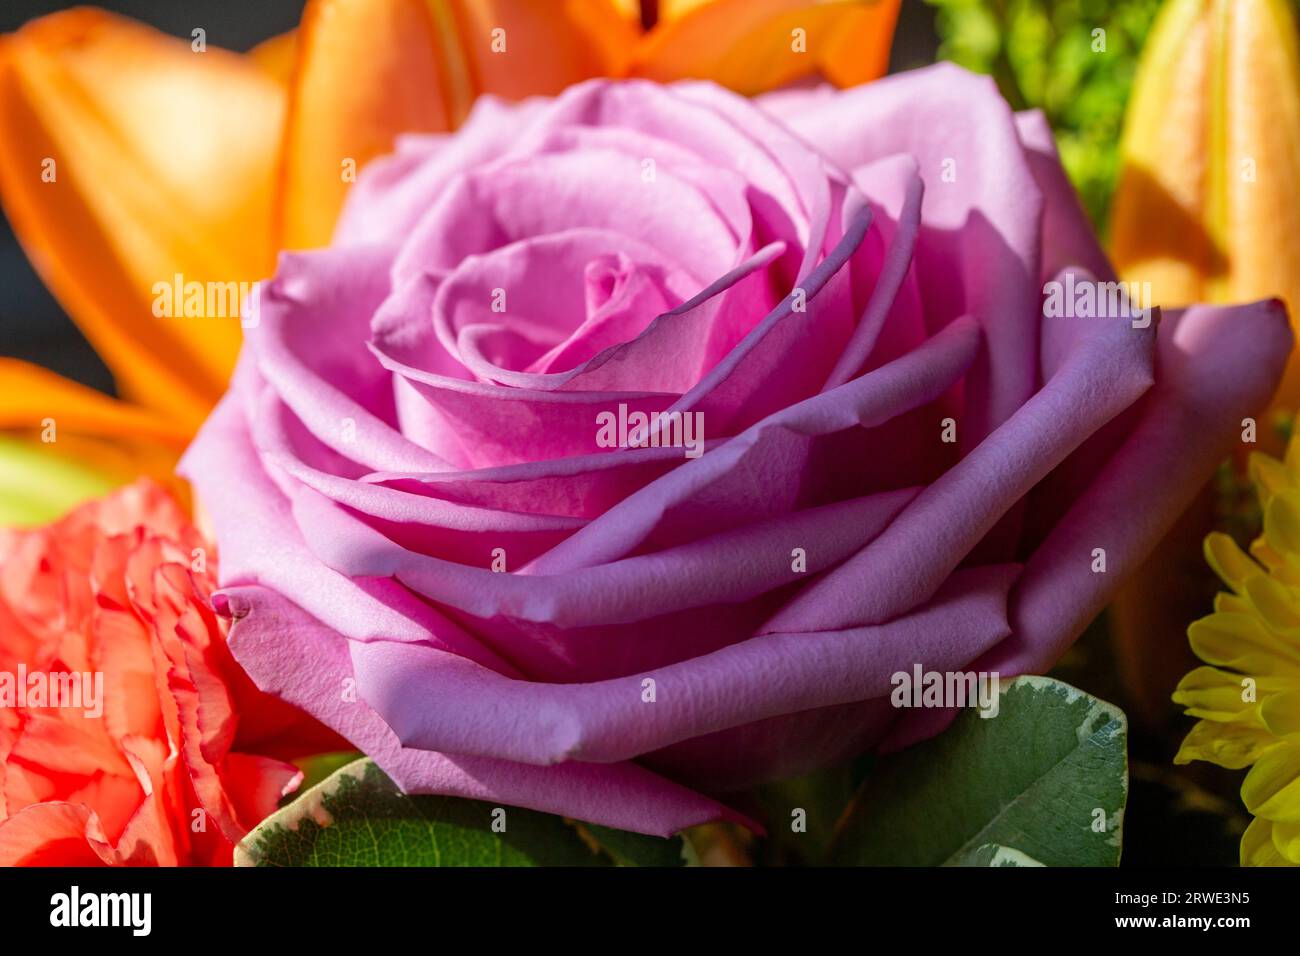 Macro texture background of fresh bright flowers in an indoor florist arrangement, featuring a lavender rose Stock Photo